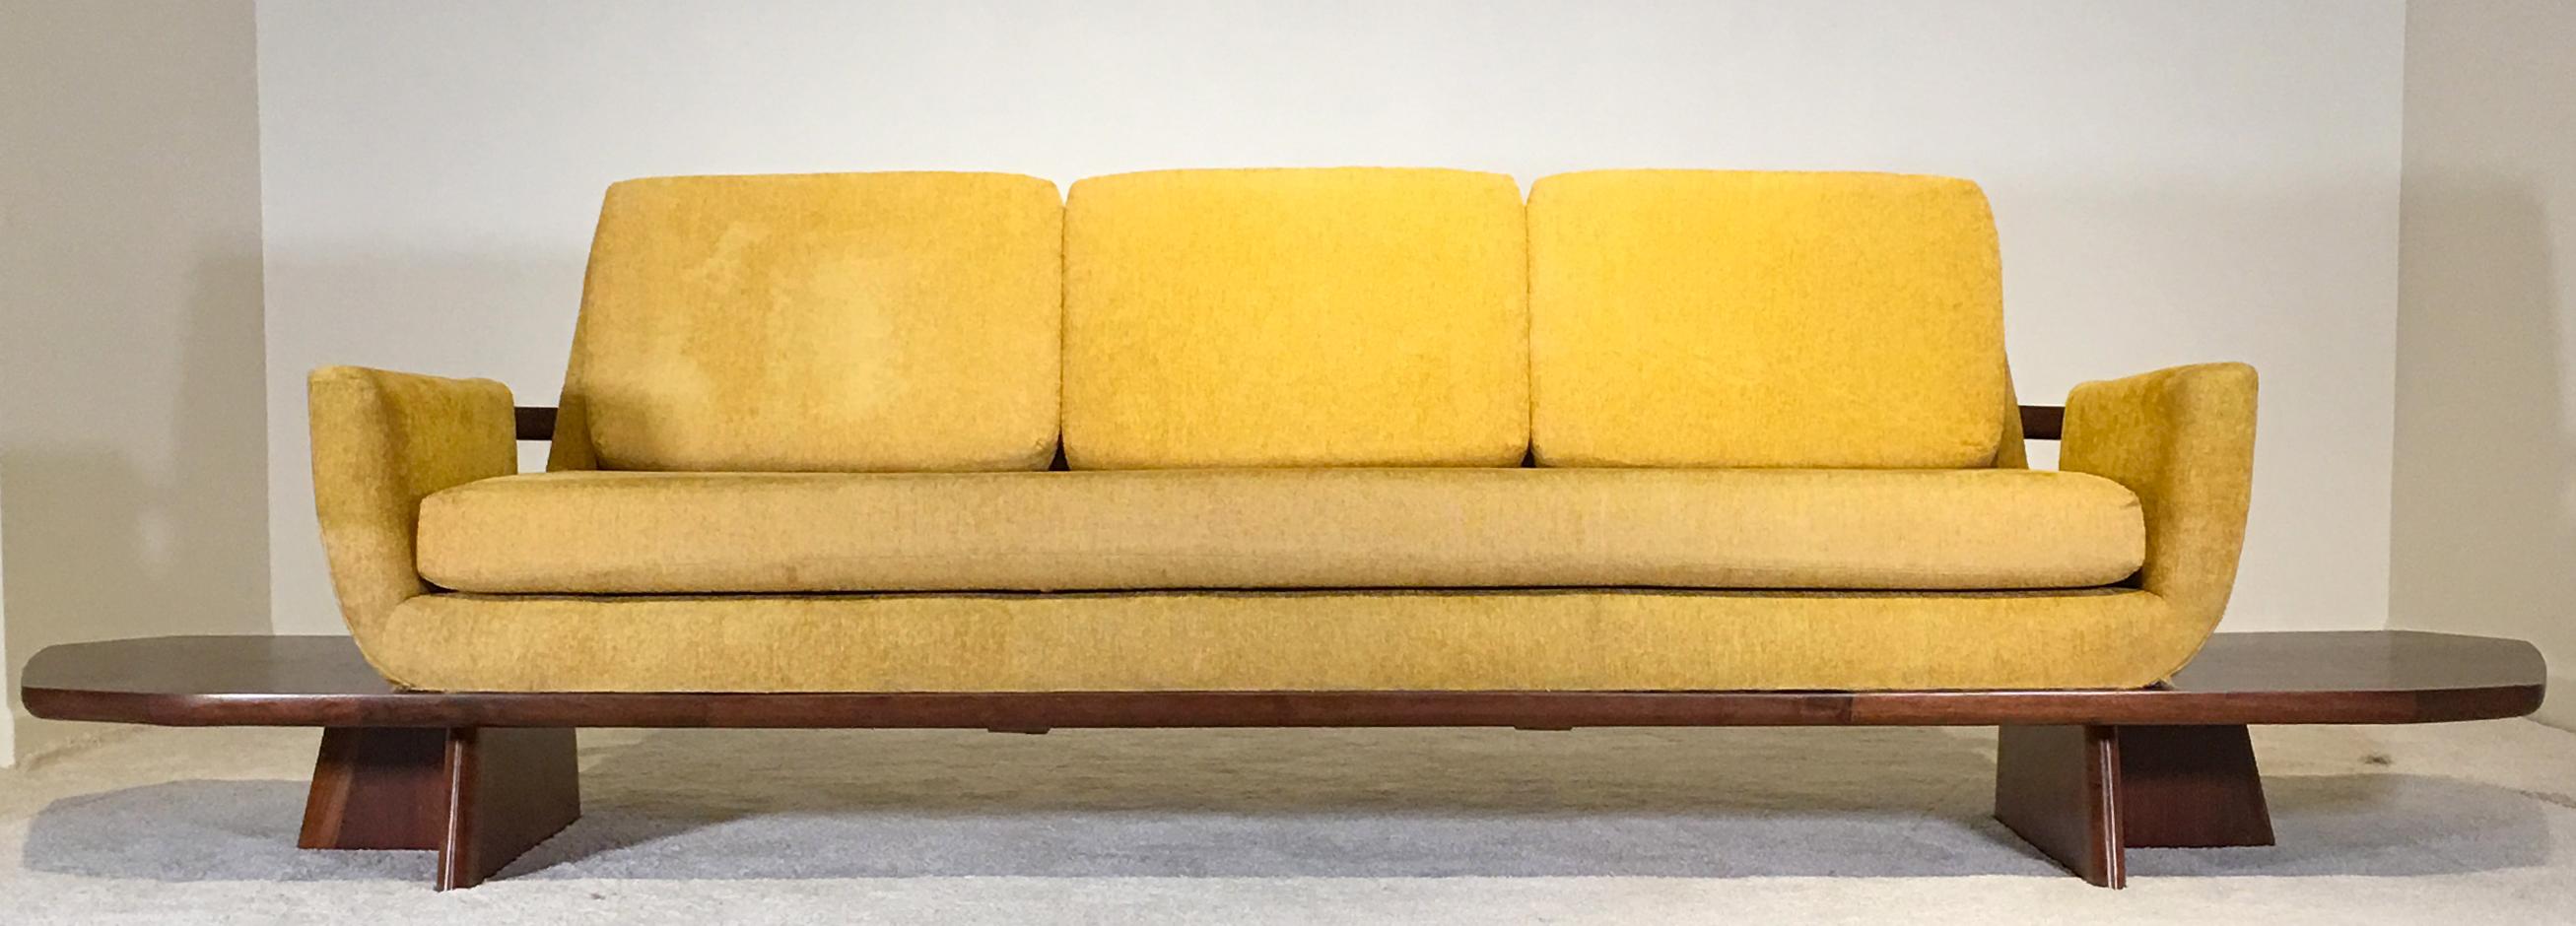 Samson Berman studio, NY, USA circa 1955 Measures: 123.75 wide x 30.25 deep and 34 inches tall. Priced to allow a client to reupholster the piece.

A one of kind 10 foot modernist floating platform sofa in walnut, with luxurious seating for 3 with